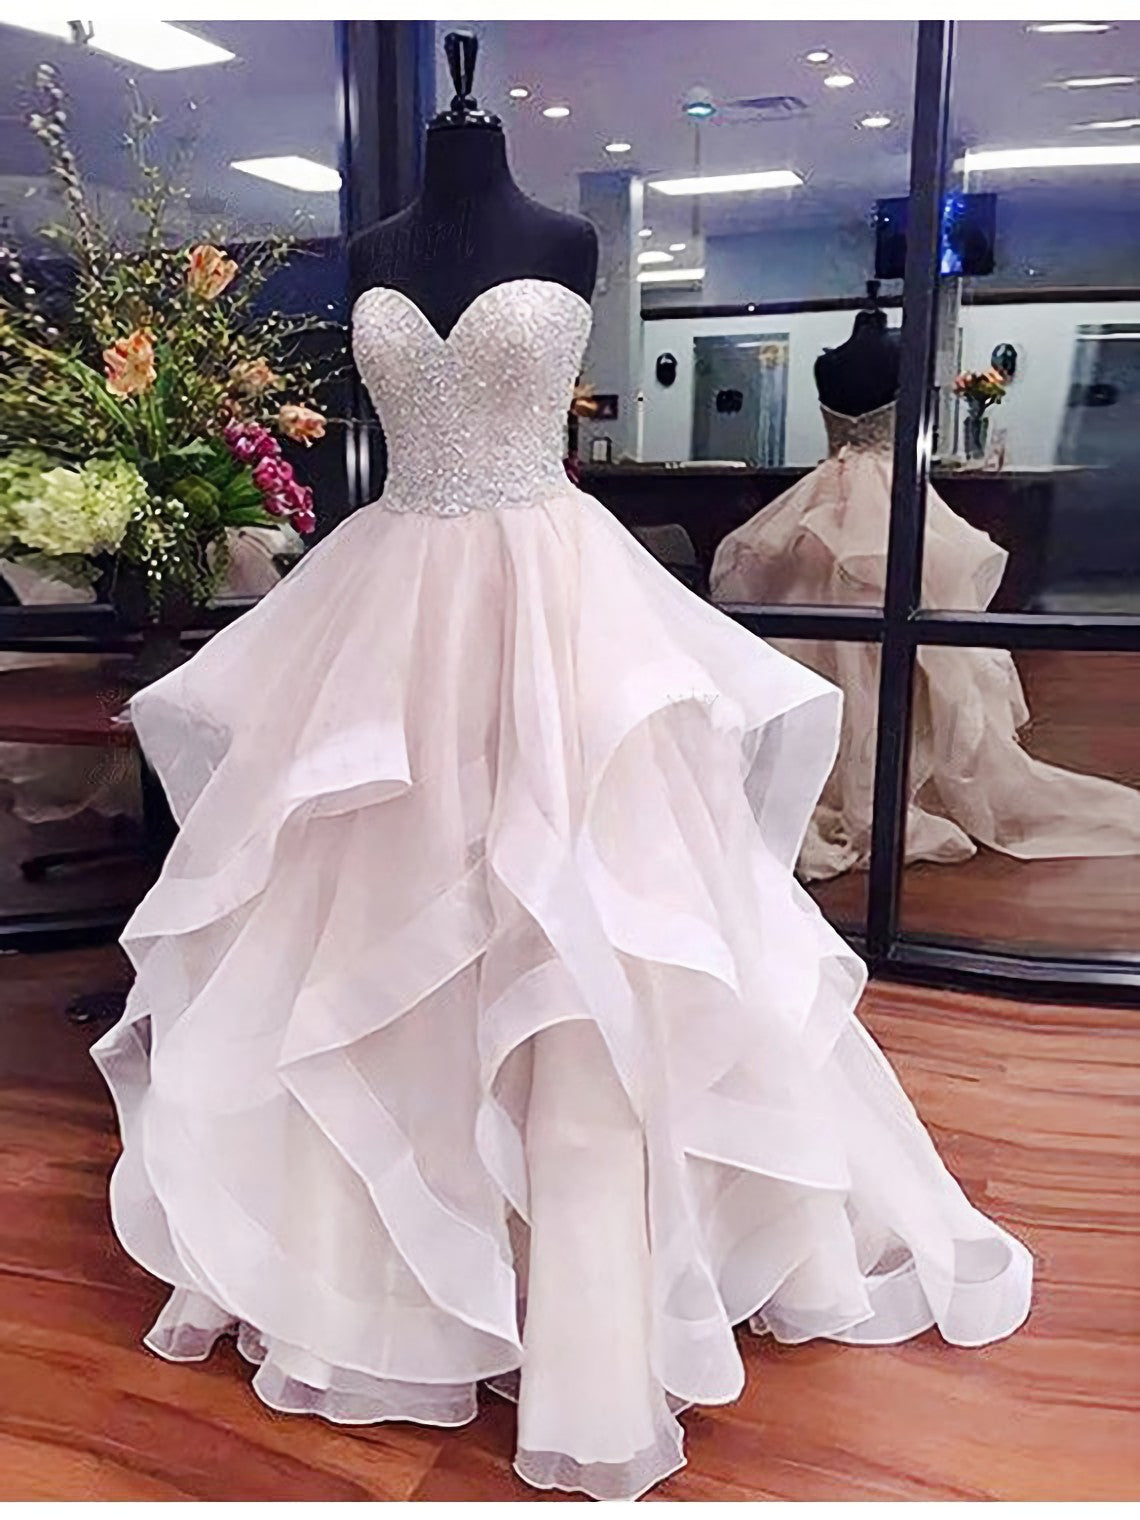 Bridesmaid Dress Mdae To Order, A Line Sweetheart Asymmetrical Ivory Organza With Lace Beading Prom Dresses